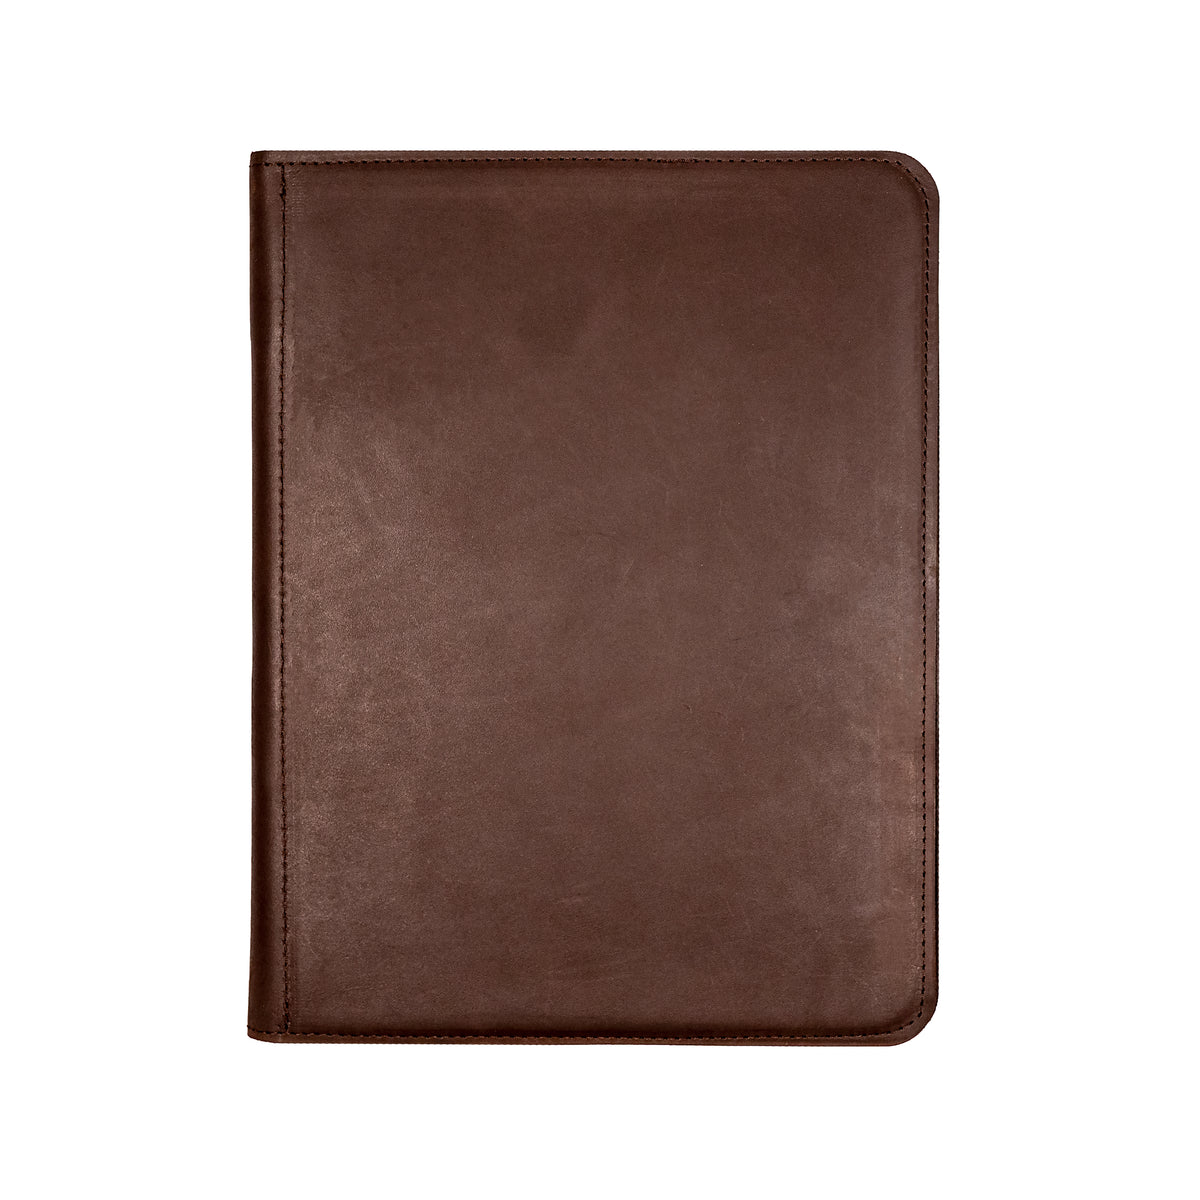 Personalized Leather Portfolio, 3 Ring Binder Portfolio, Leather Padfolio  for A4 Notepad Folder, Portfolio With Name, Gift for Father/him 